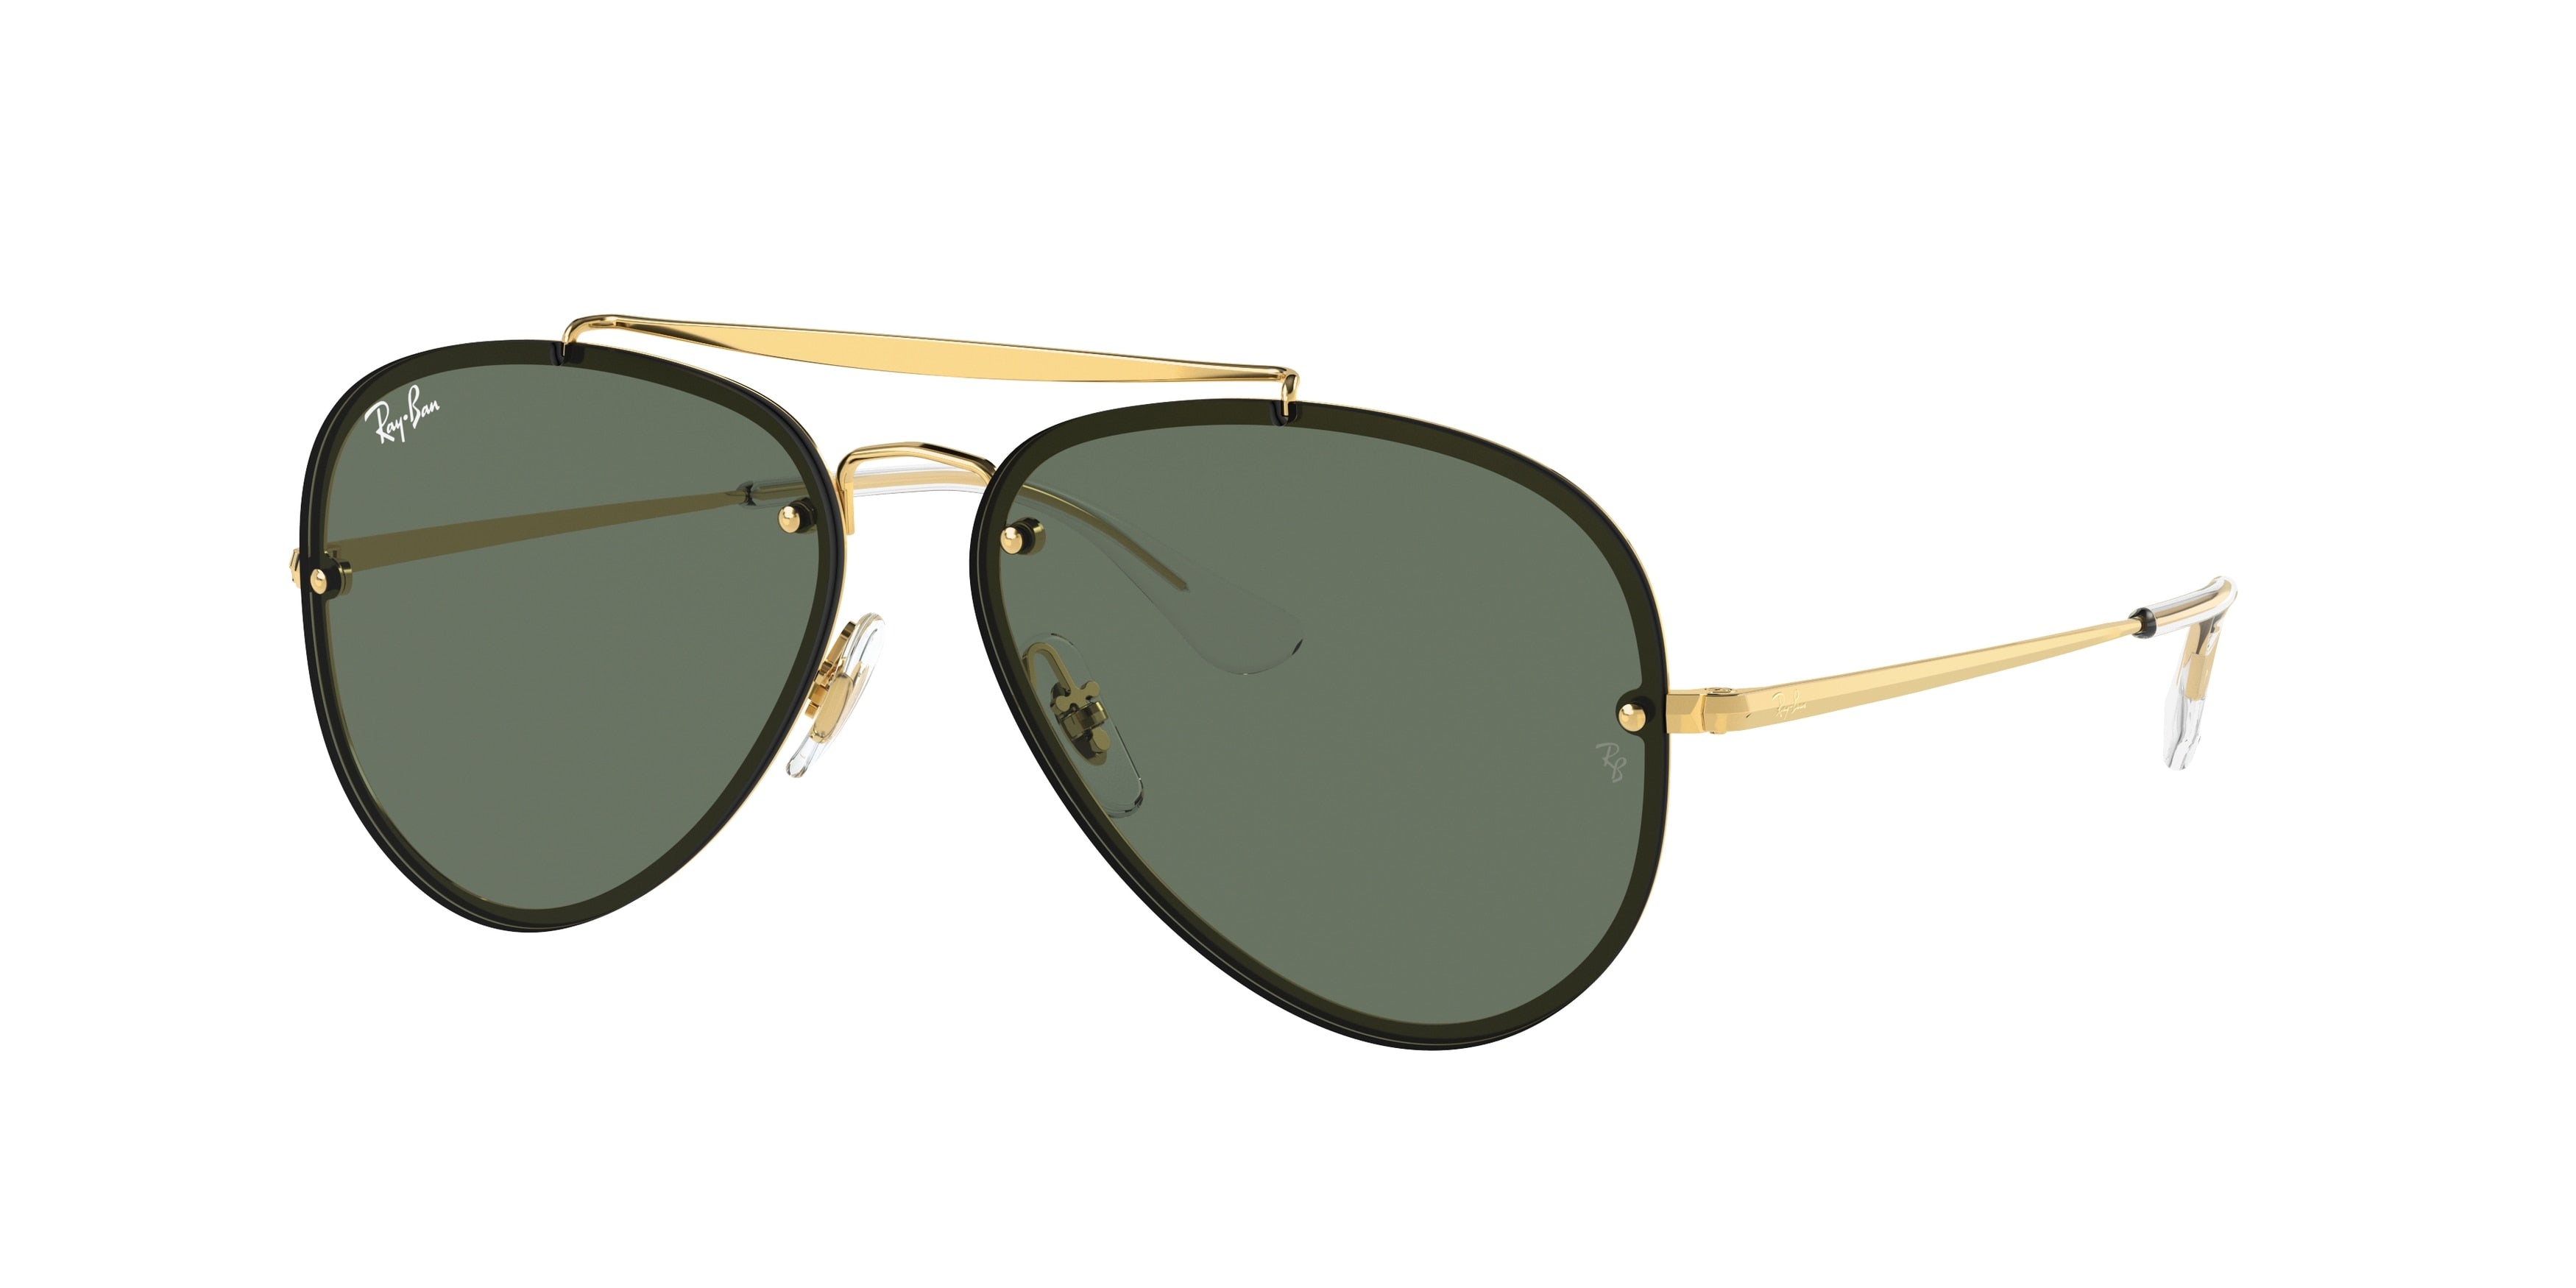 Ray-Ban BLAZE AVIATOR RB3584N Pilot Sunglasses  905071-Gold 61-145-13 - Color Map Gold